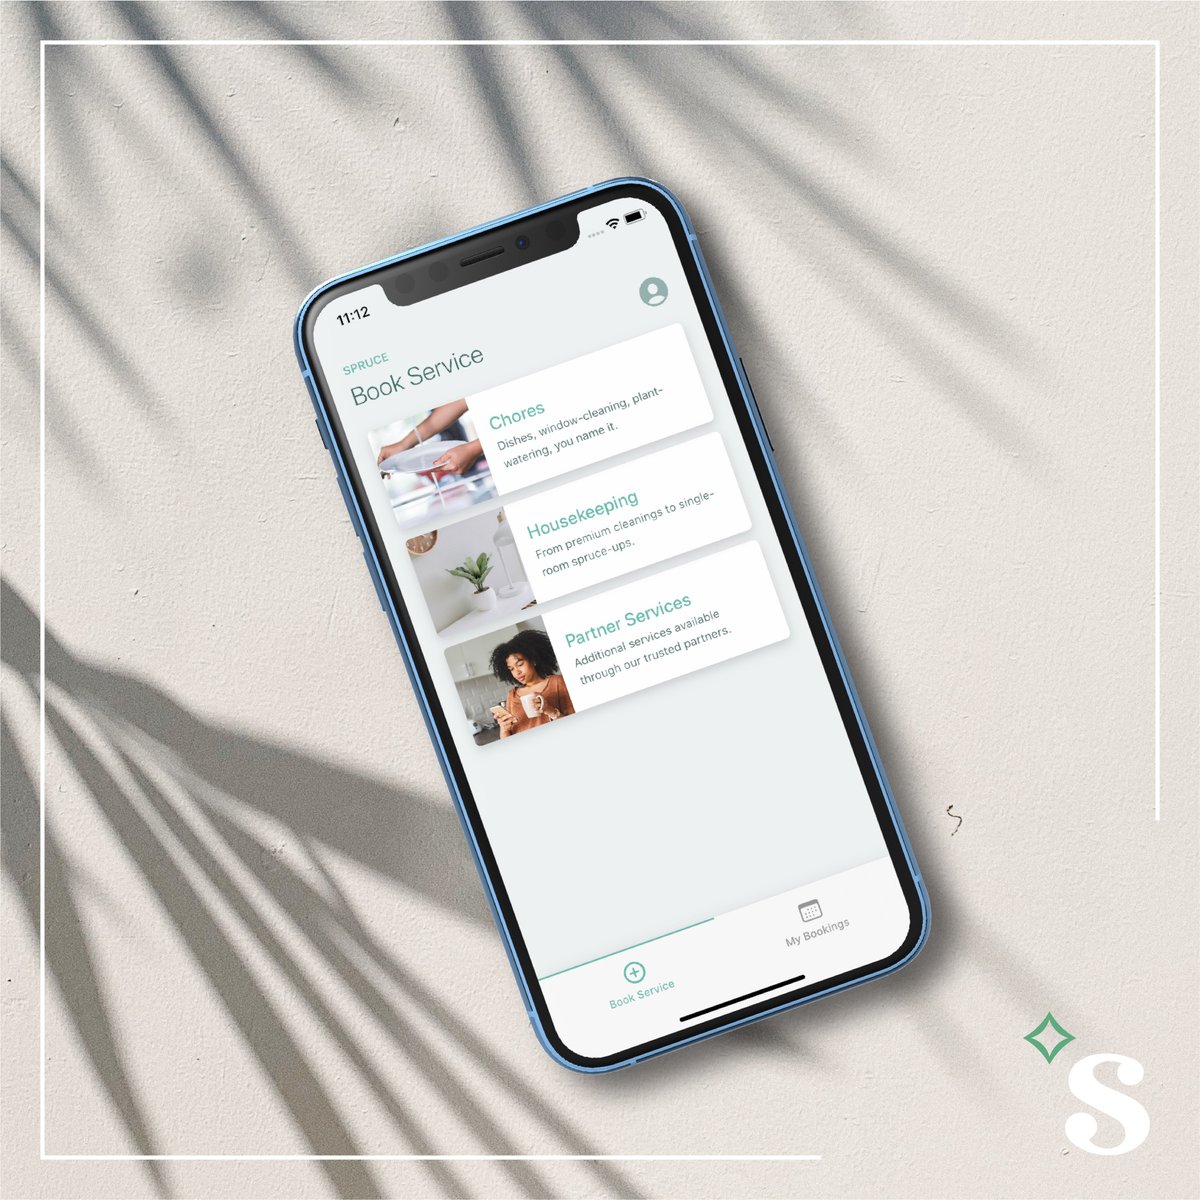 Your personal cleaning genie! With just a tap, we'll make your cleaning wishes come true. 💫✨ Download now and experience the magic! #SpruceGenie

#ChoreLess #GetSpruce #apartmentliving #apartmentclean